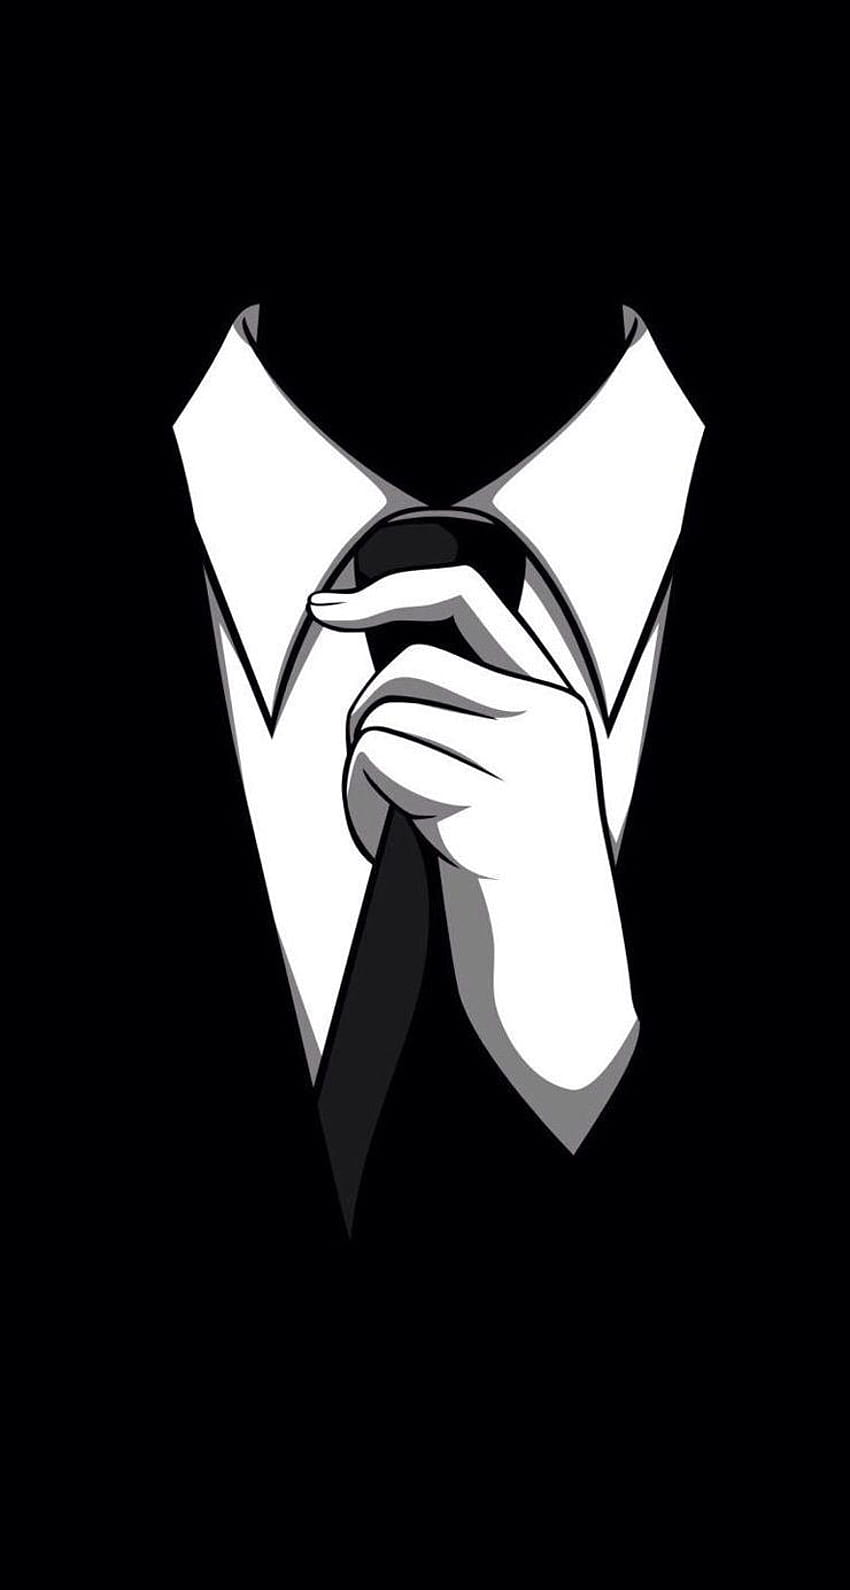 Suit iPhone 5, suit and tie HD phone wallpaper